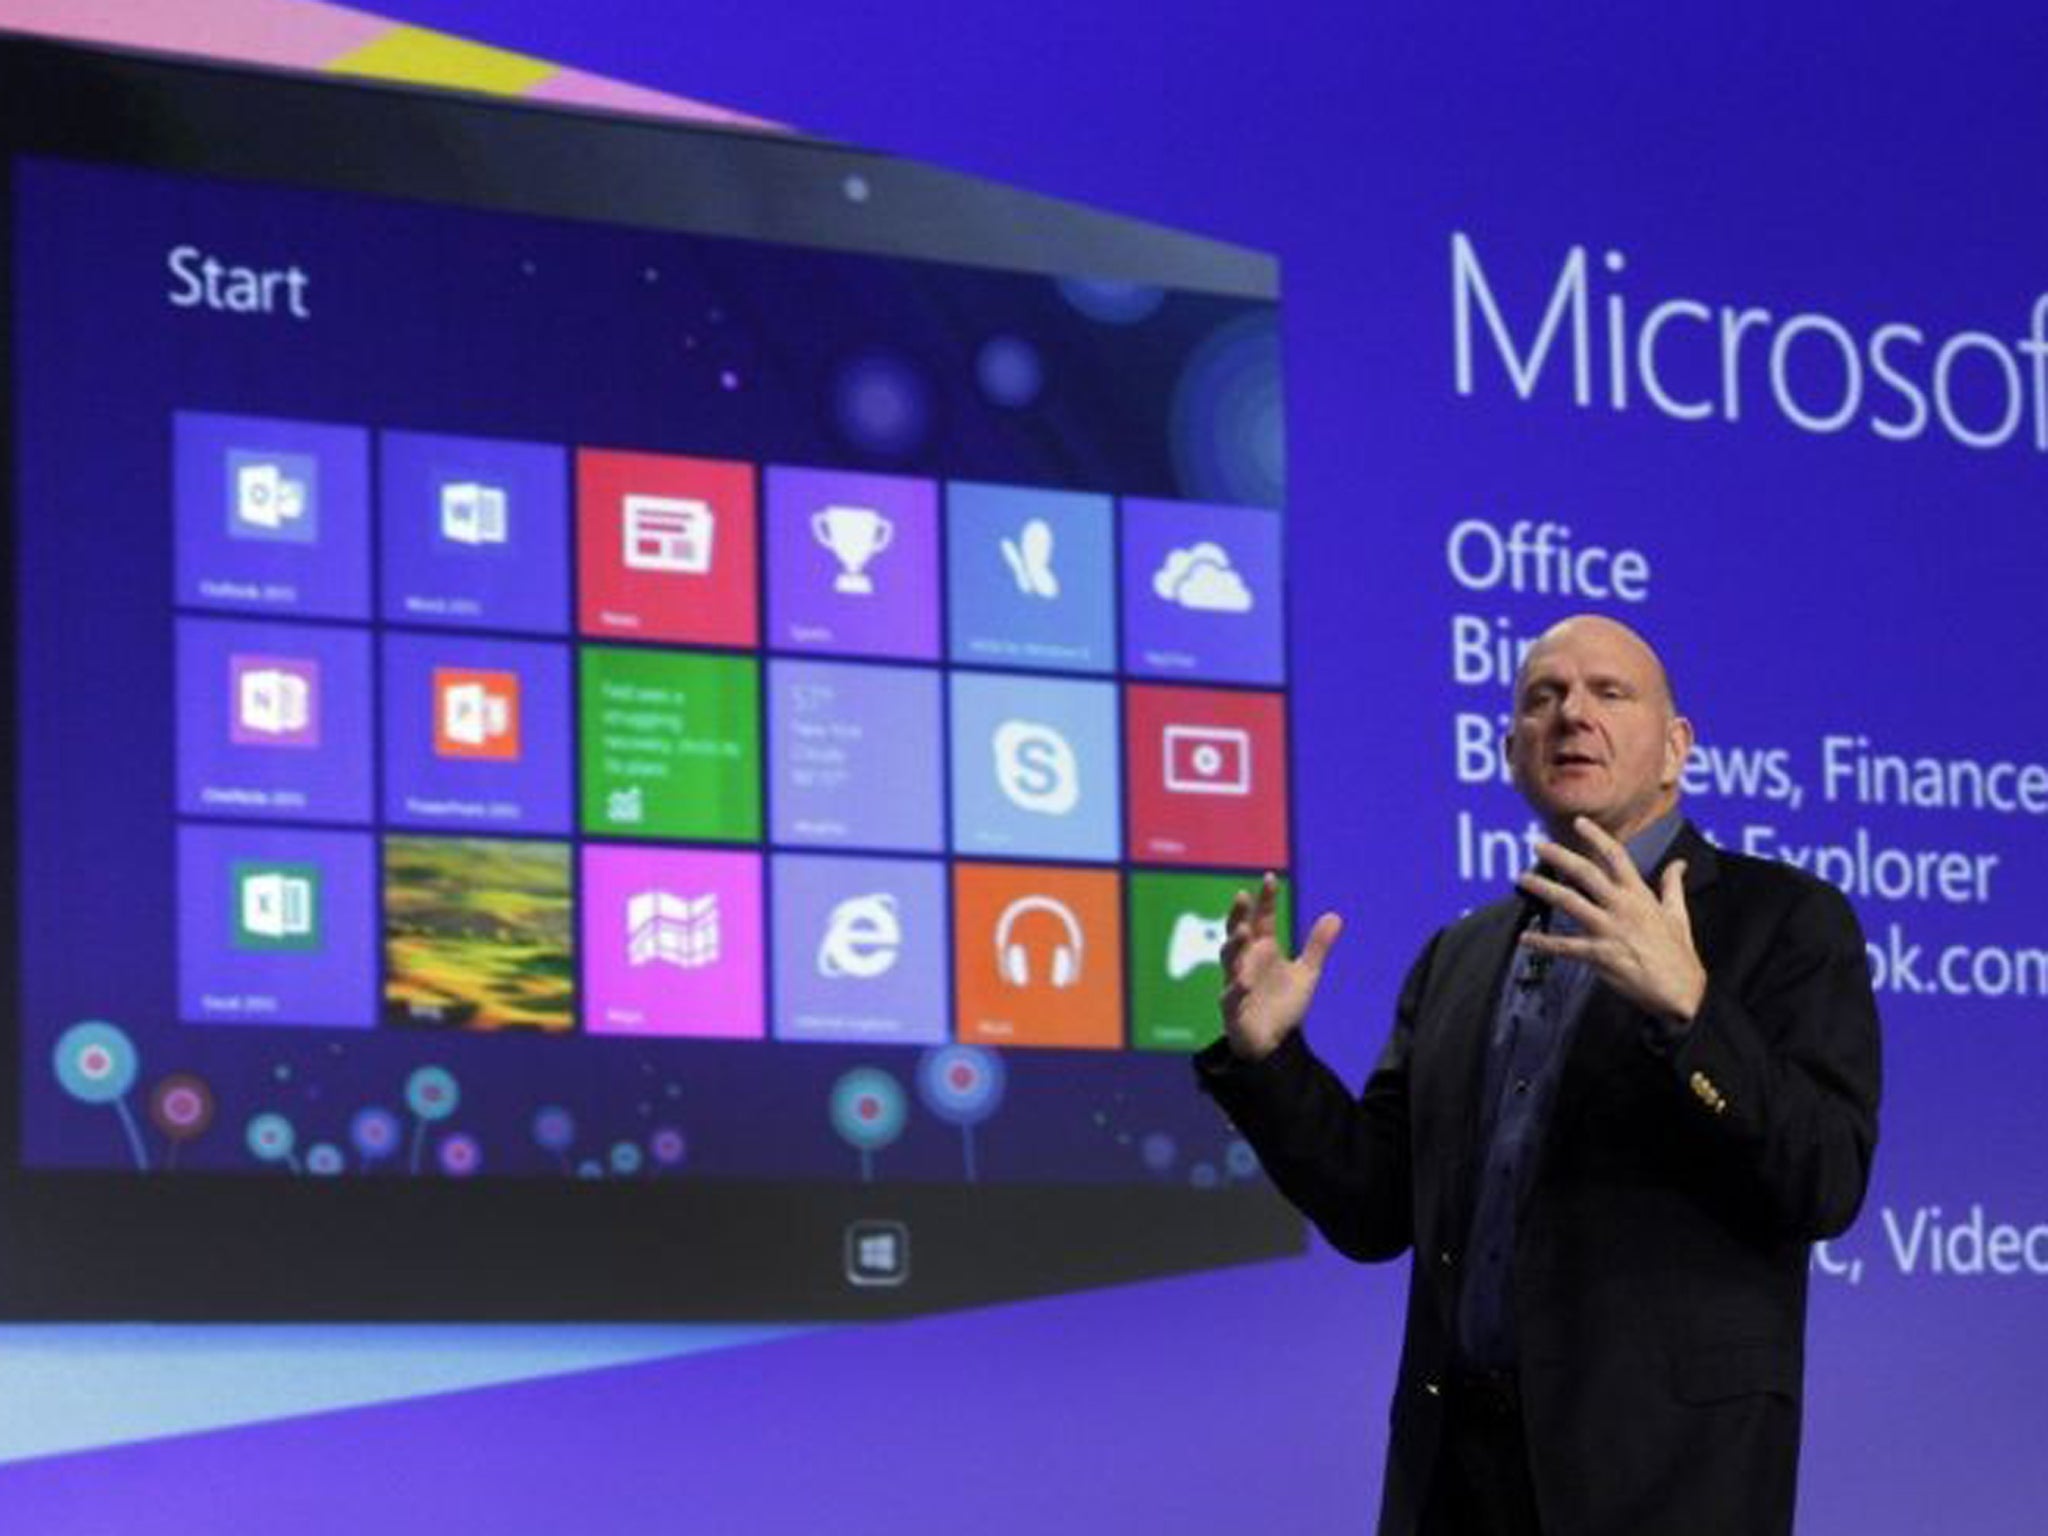 Microsoft CEO Steve Ballmer at the launch of Microsoft Windows 8 in October 2012